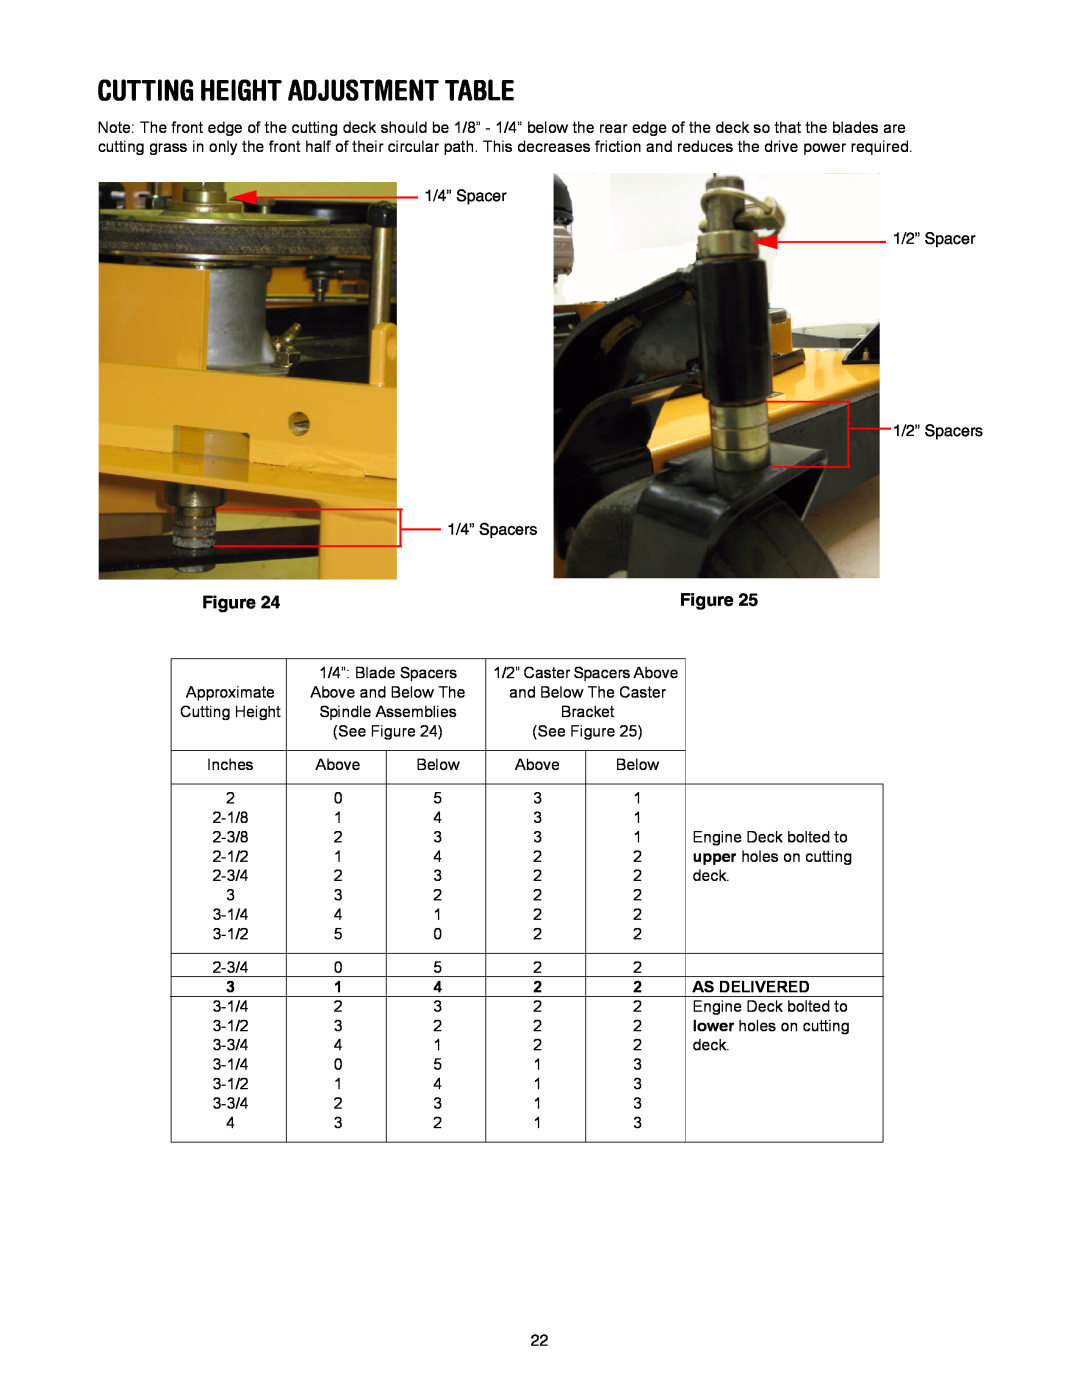 Cub Cadet G 1236 service manual Cutting Height Adjustment Table, As Delivered 